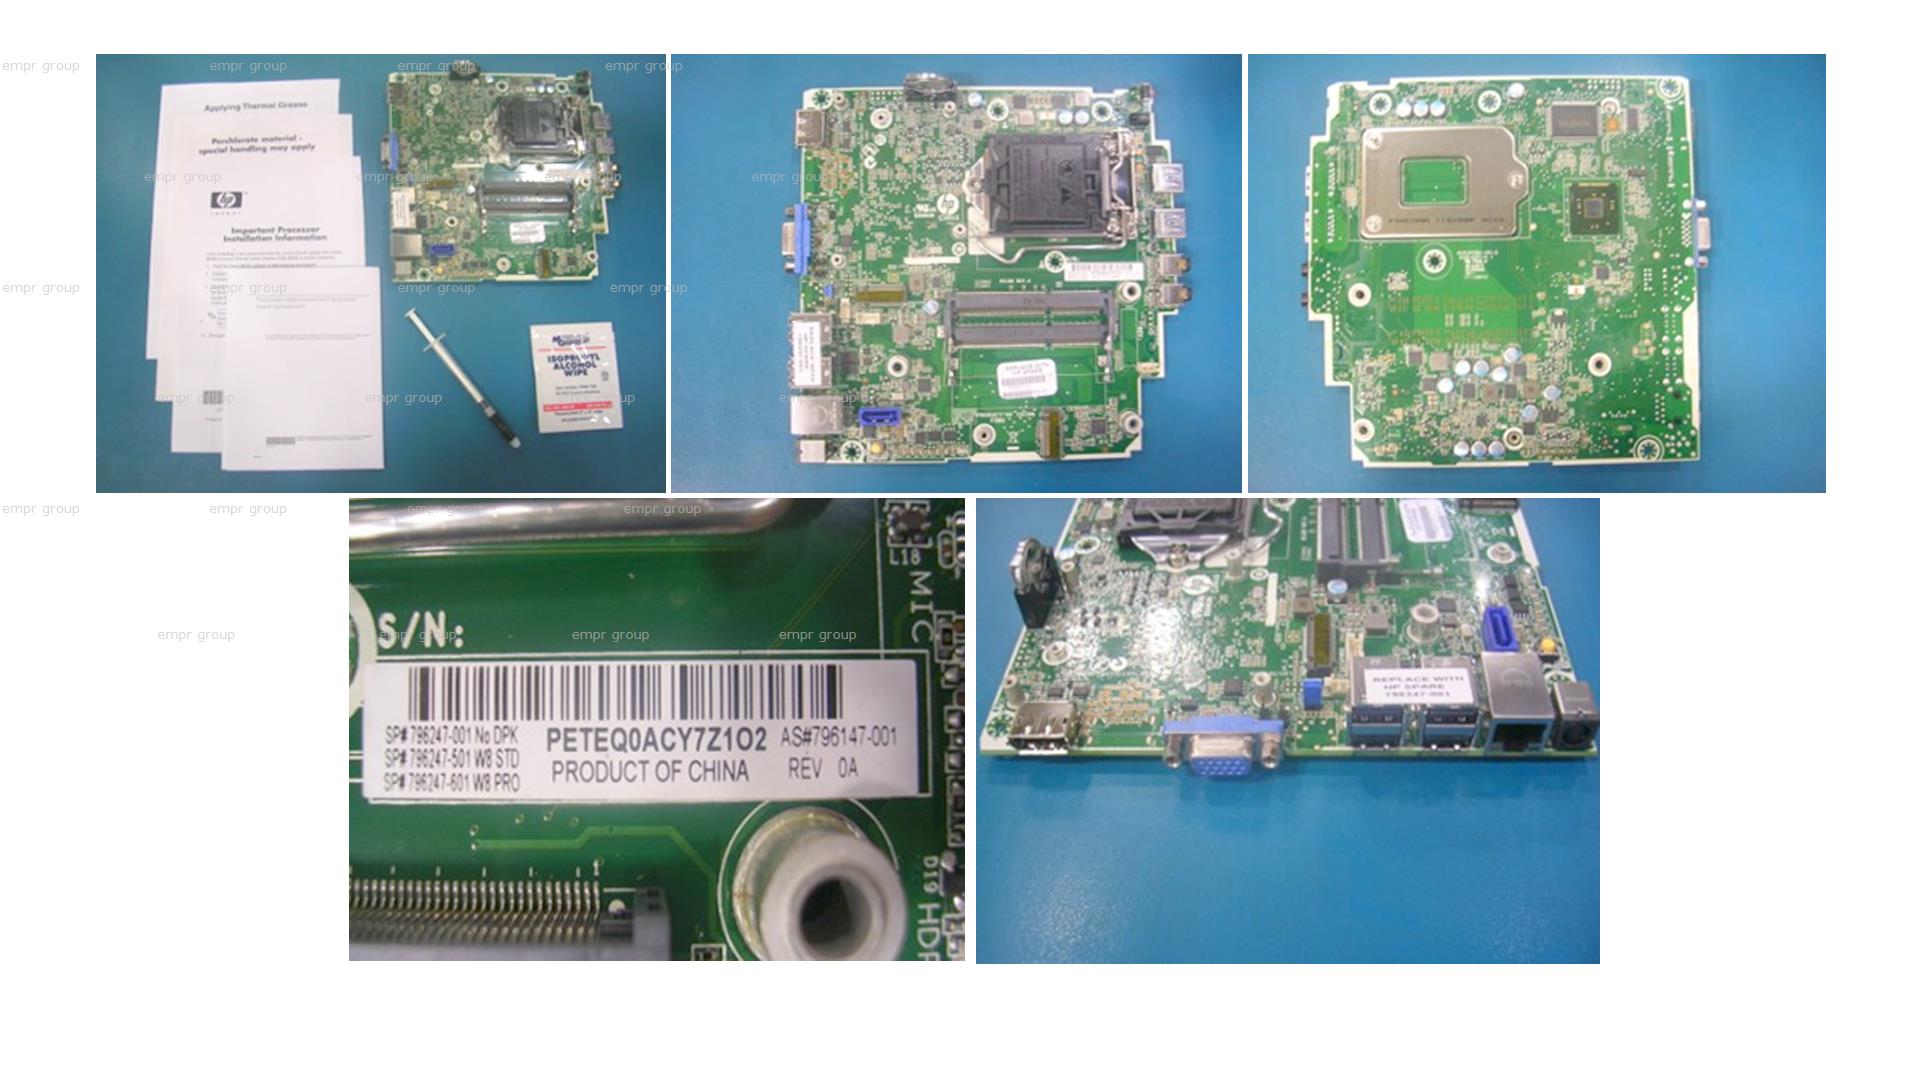 HP PRODESK 400 G1 SMALL FORM FACTOR PC - N0G74EC PC Board 796247-501